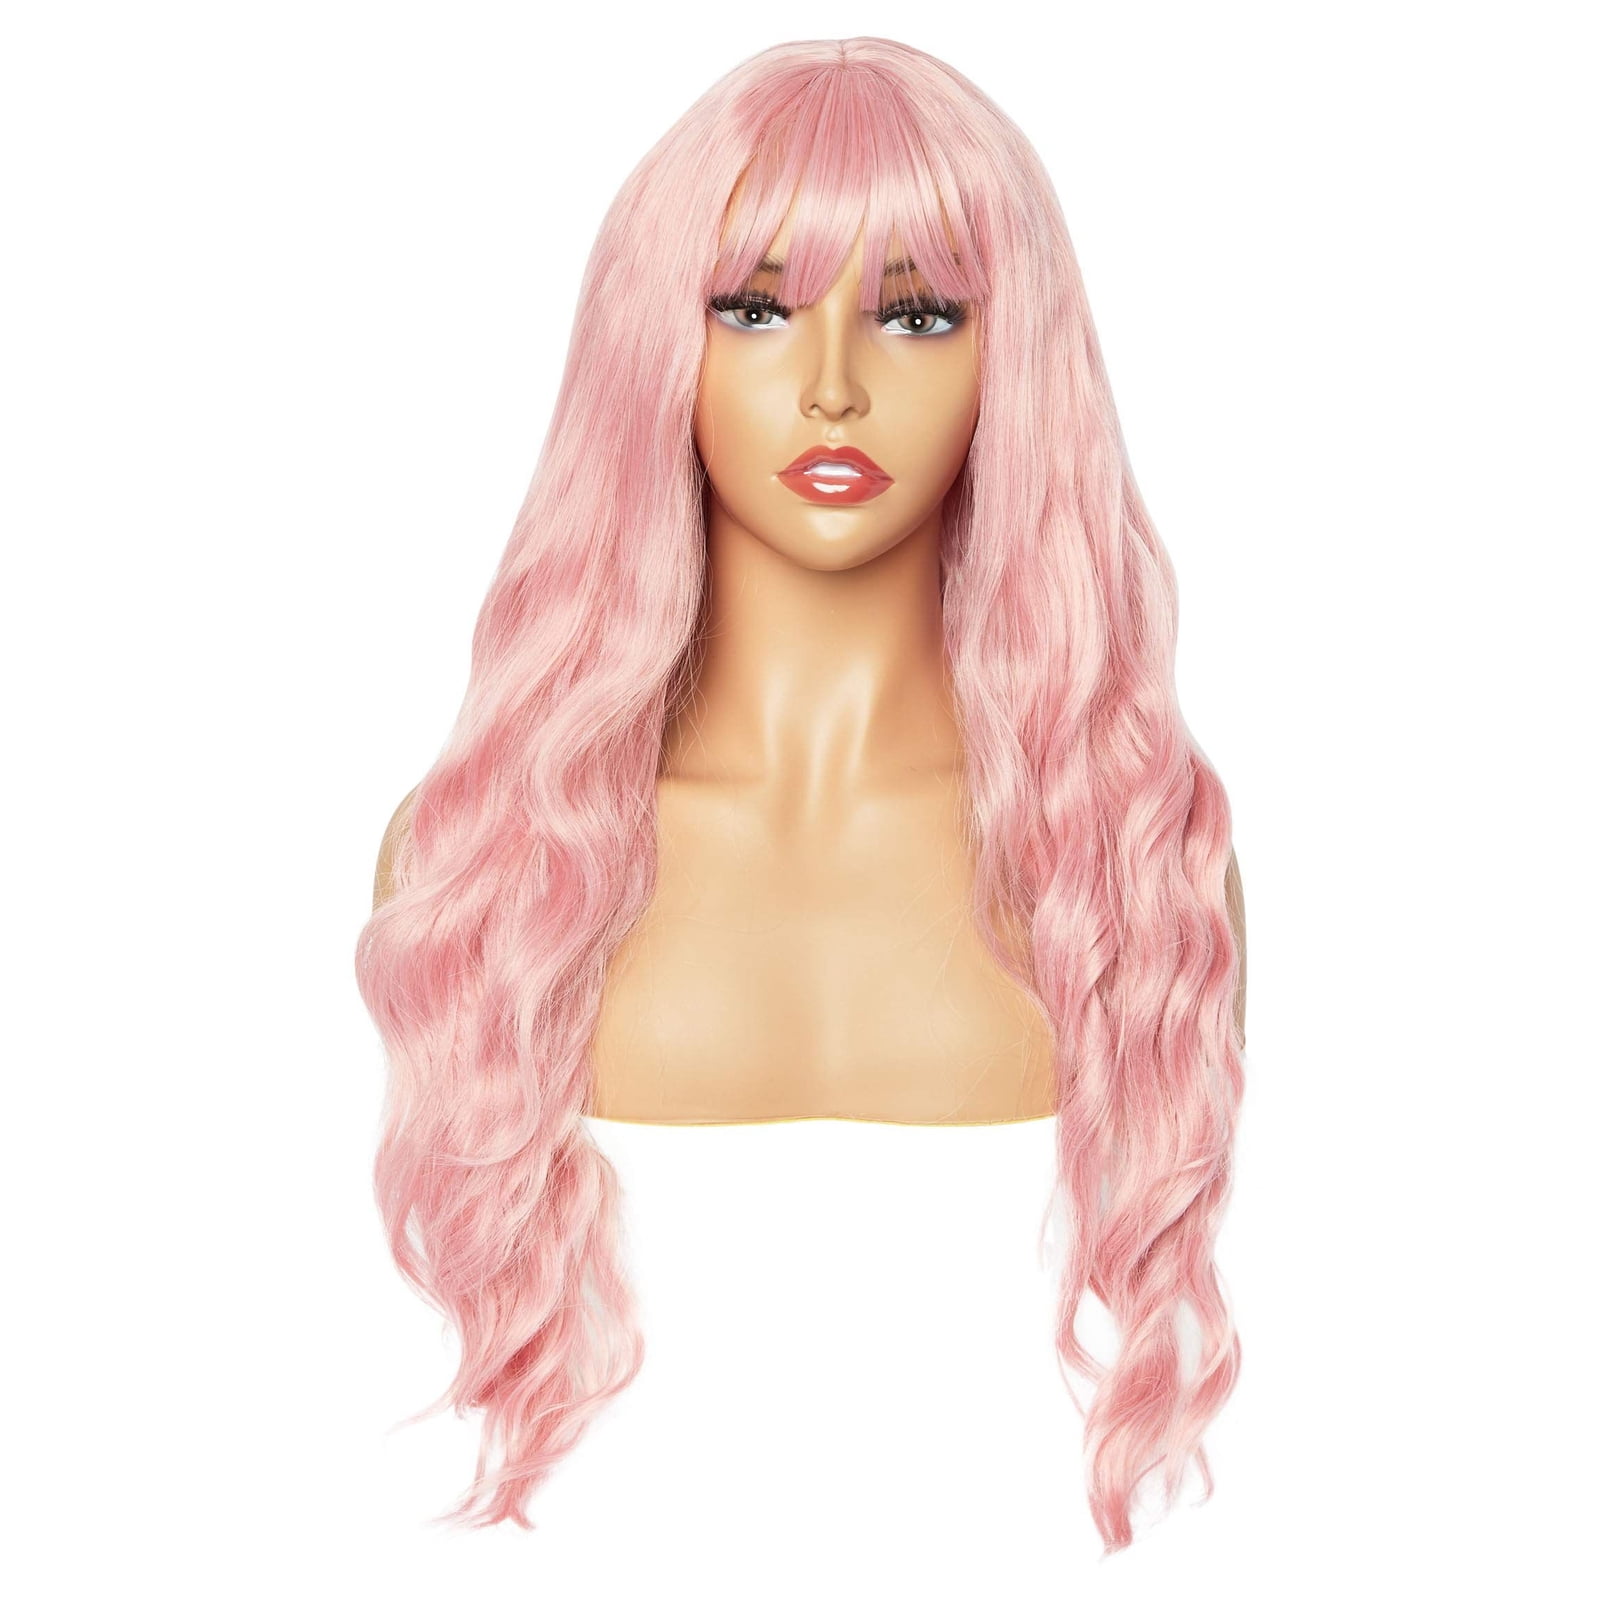 Horizontal Length 100cm Doll Accessories Straight Synthetic Fiber Wig Hair For Doll Wigs High-temperature Wire 16 colors style 2 16PCs/pack Length 15cm